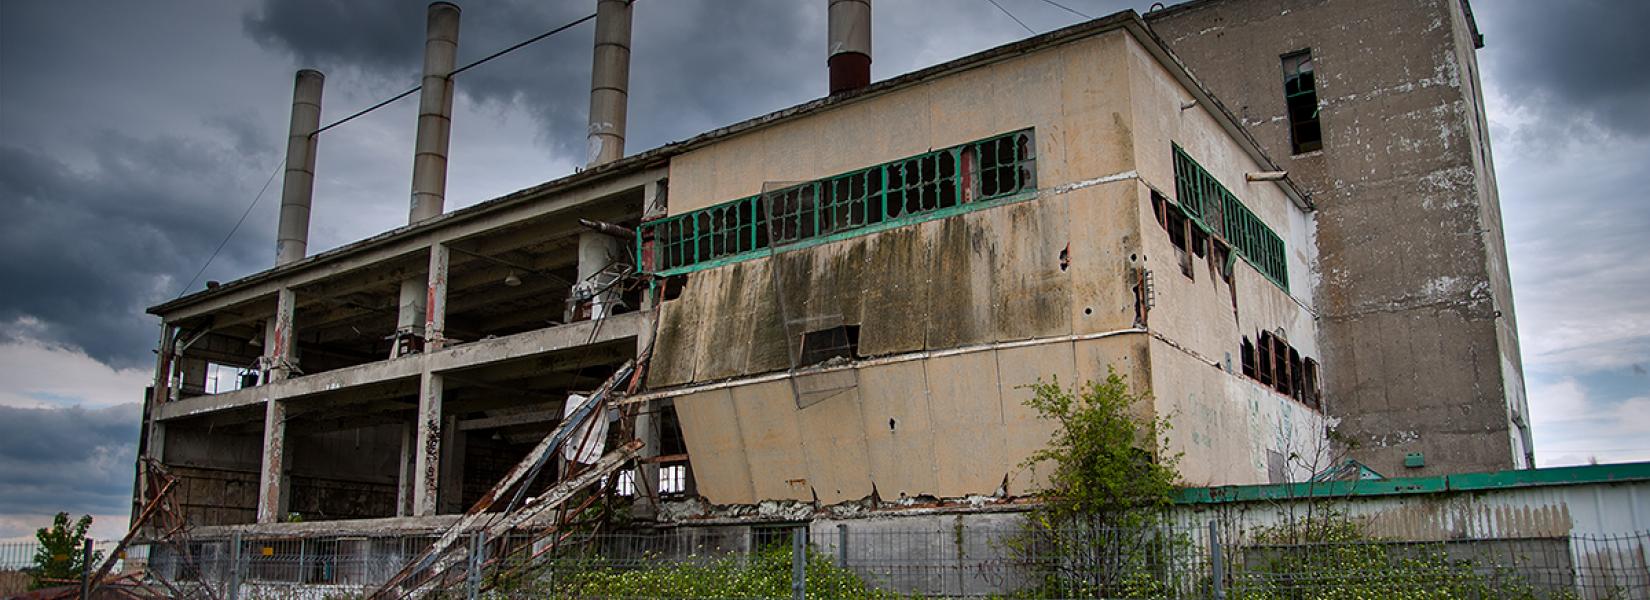 The abandoned plant in St-Hubert